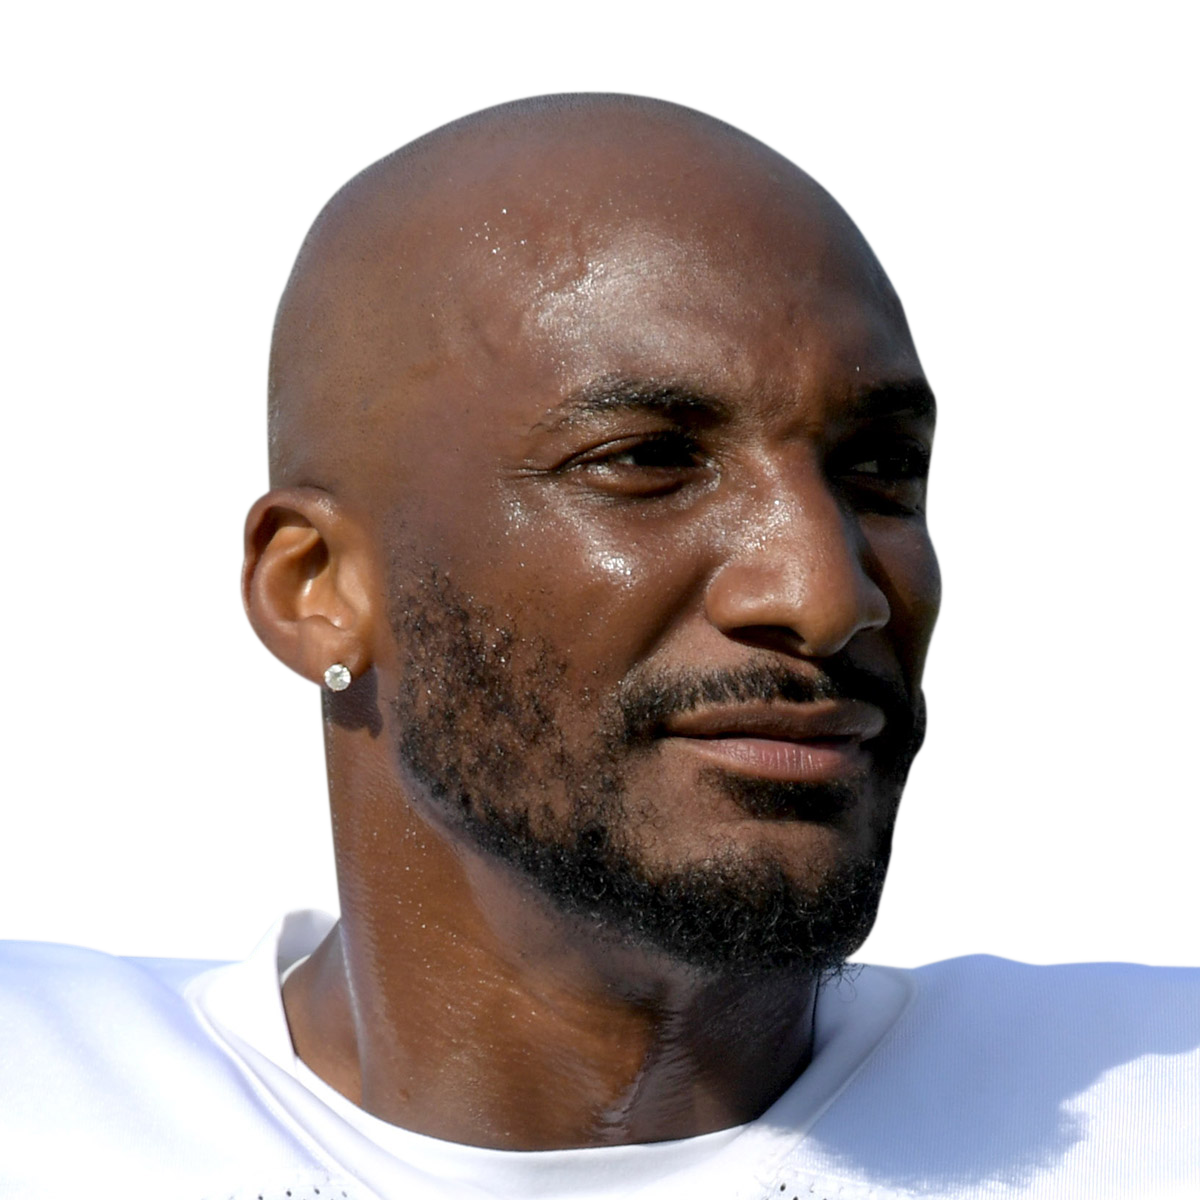 Aqib Talib’s brother pleads guilty to murder, faces 37 years in prison